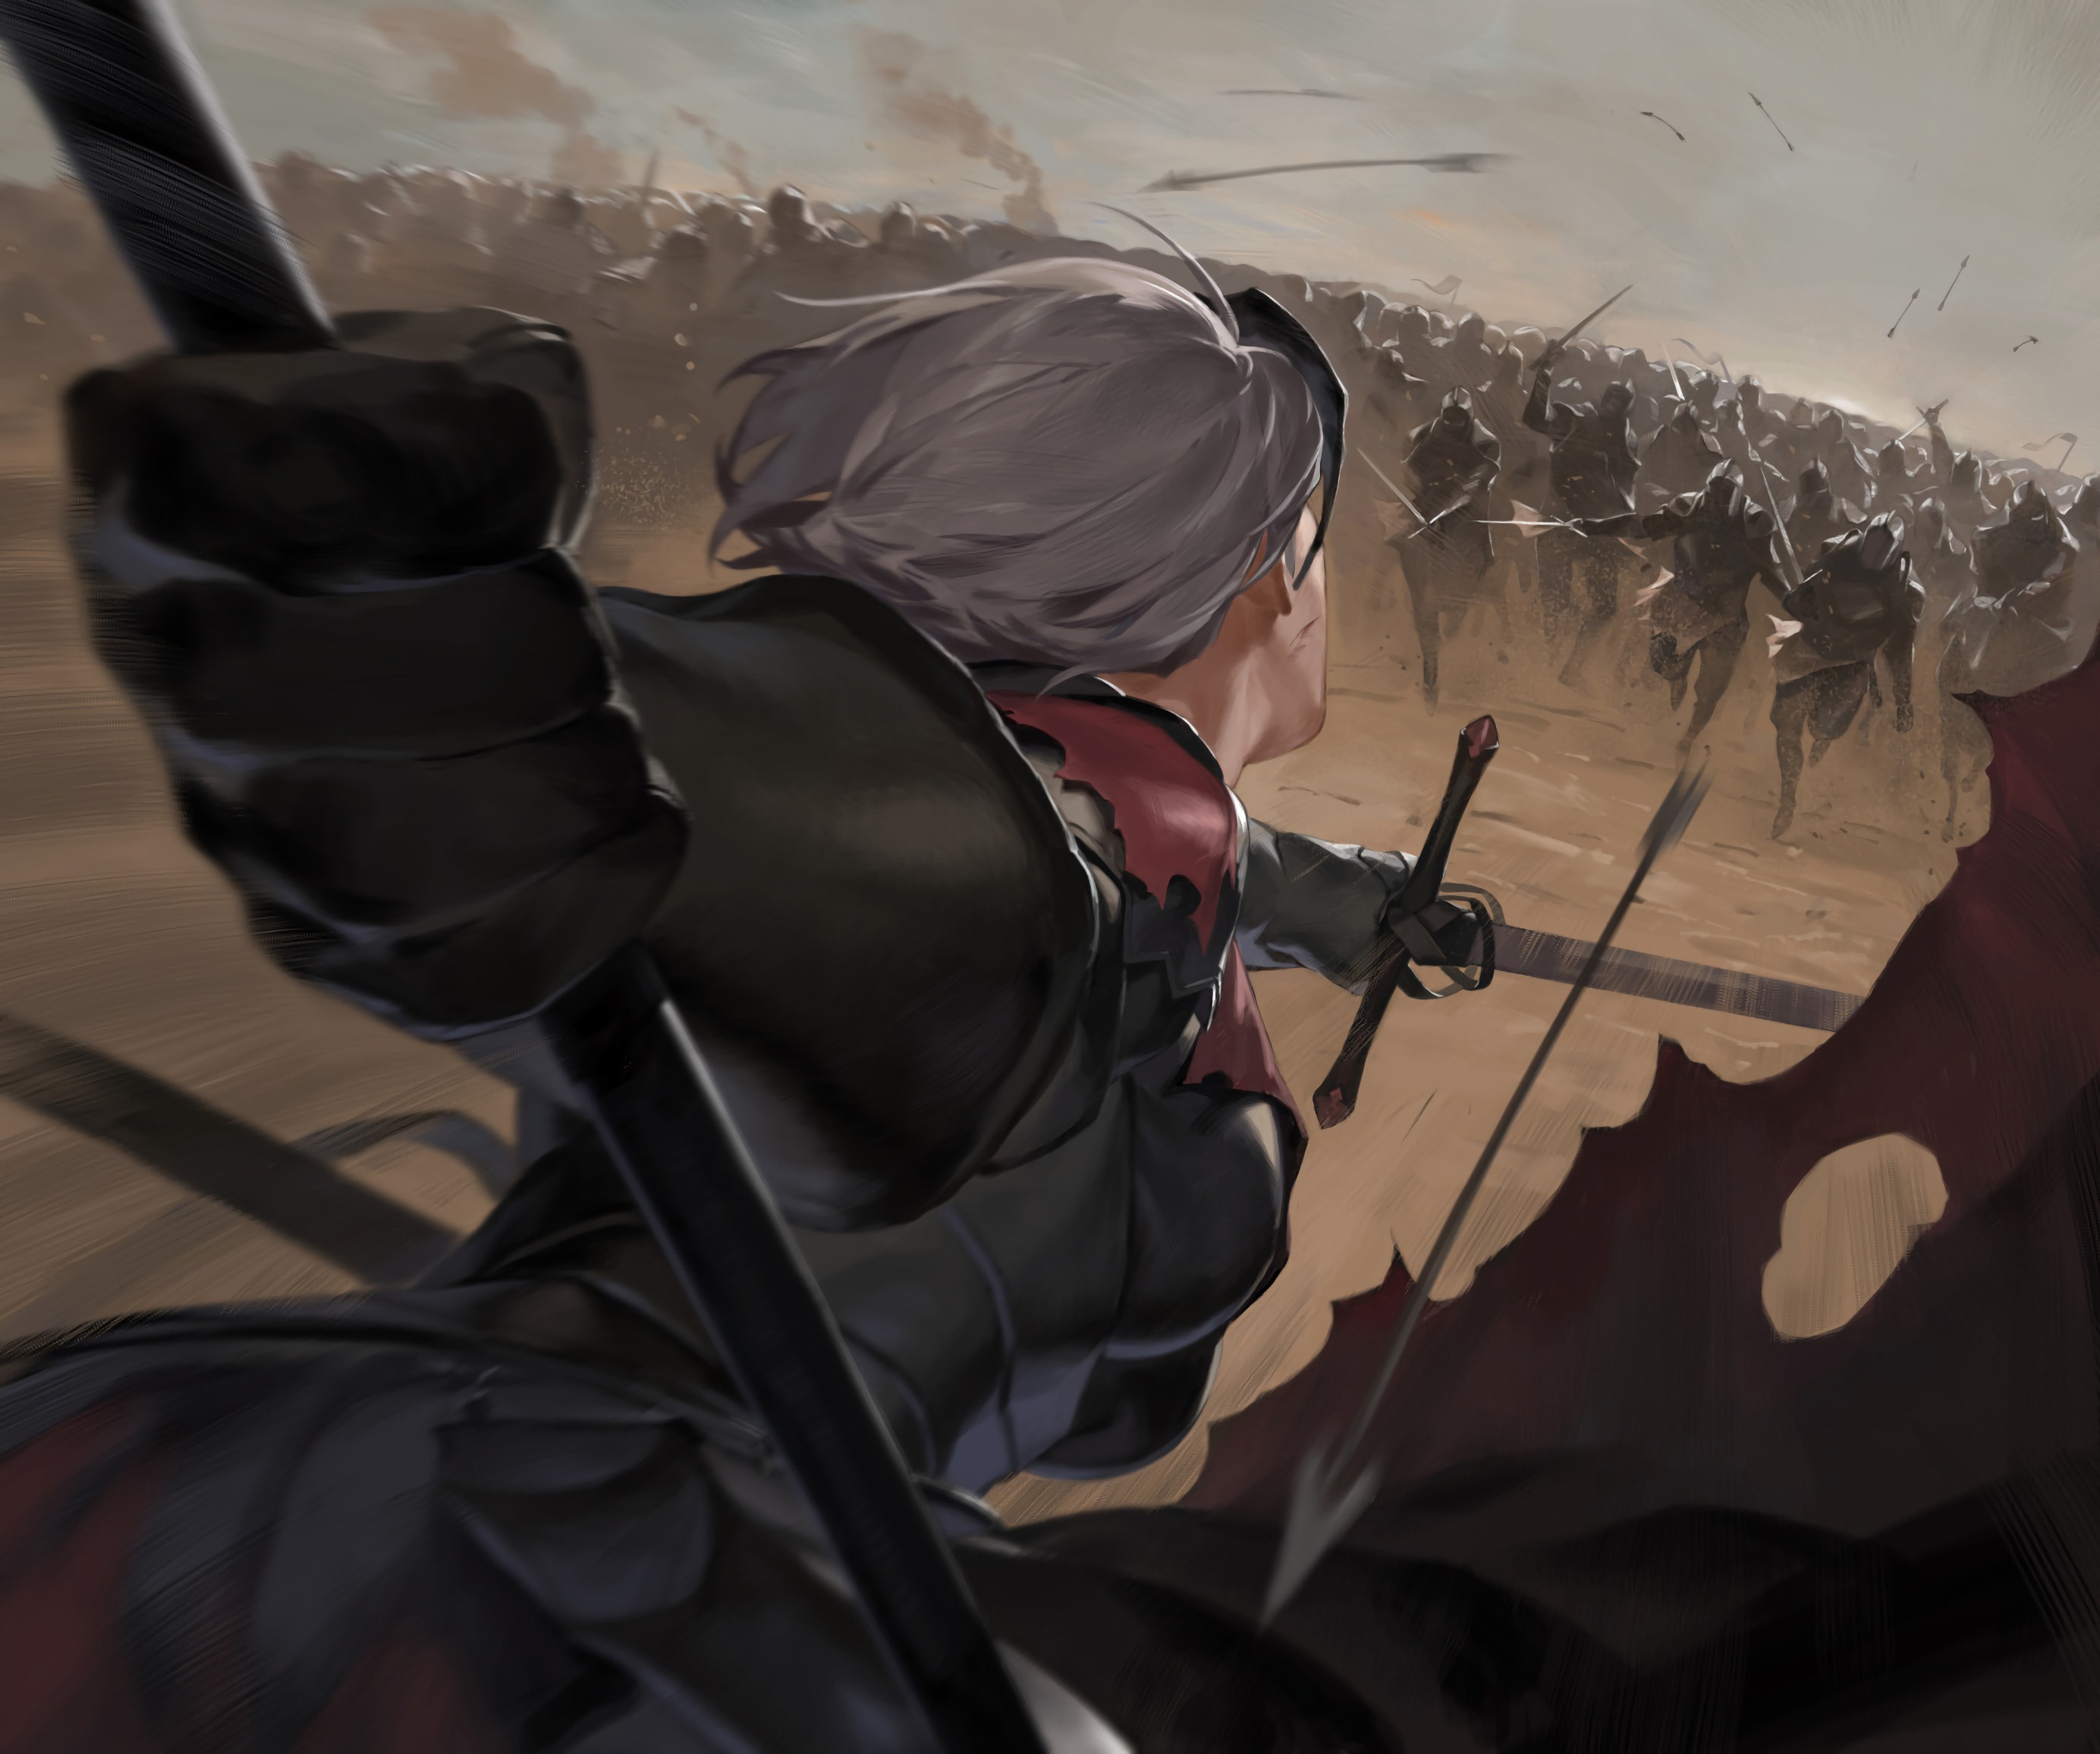 Athah Designs Anime Original Battlefield 1 Girl Horse War 13*19 inches Wall  Poster Matte Finish : Amazon.in